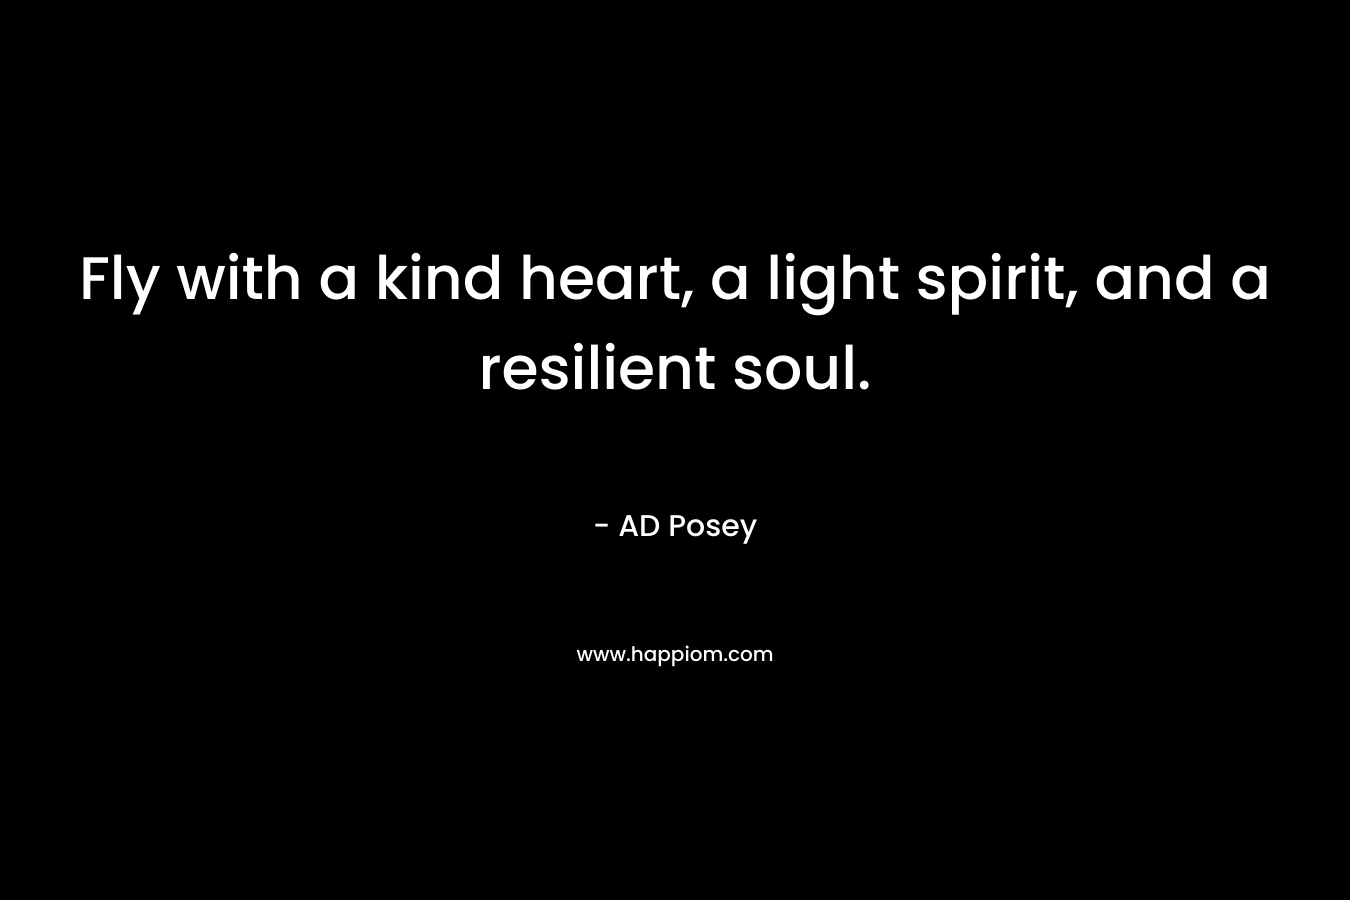 Fly with a kind heart, a light spirit, and a resilient soul.